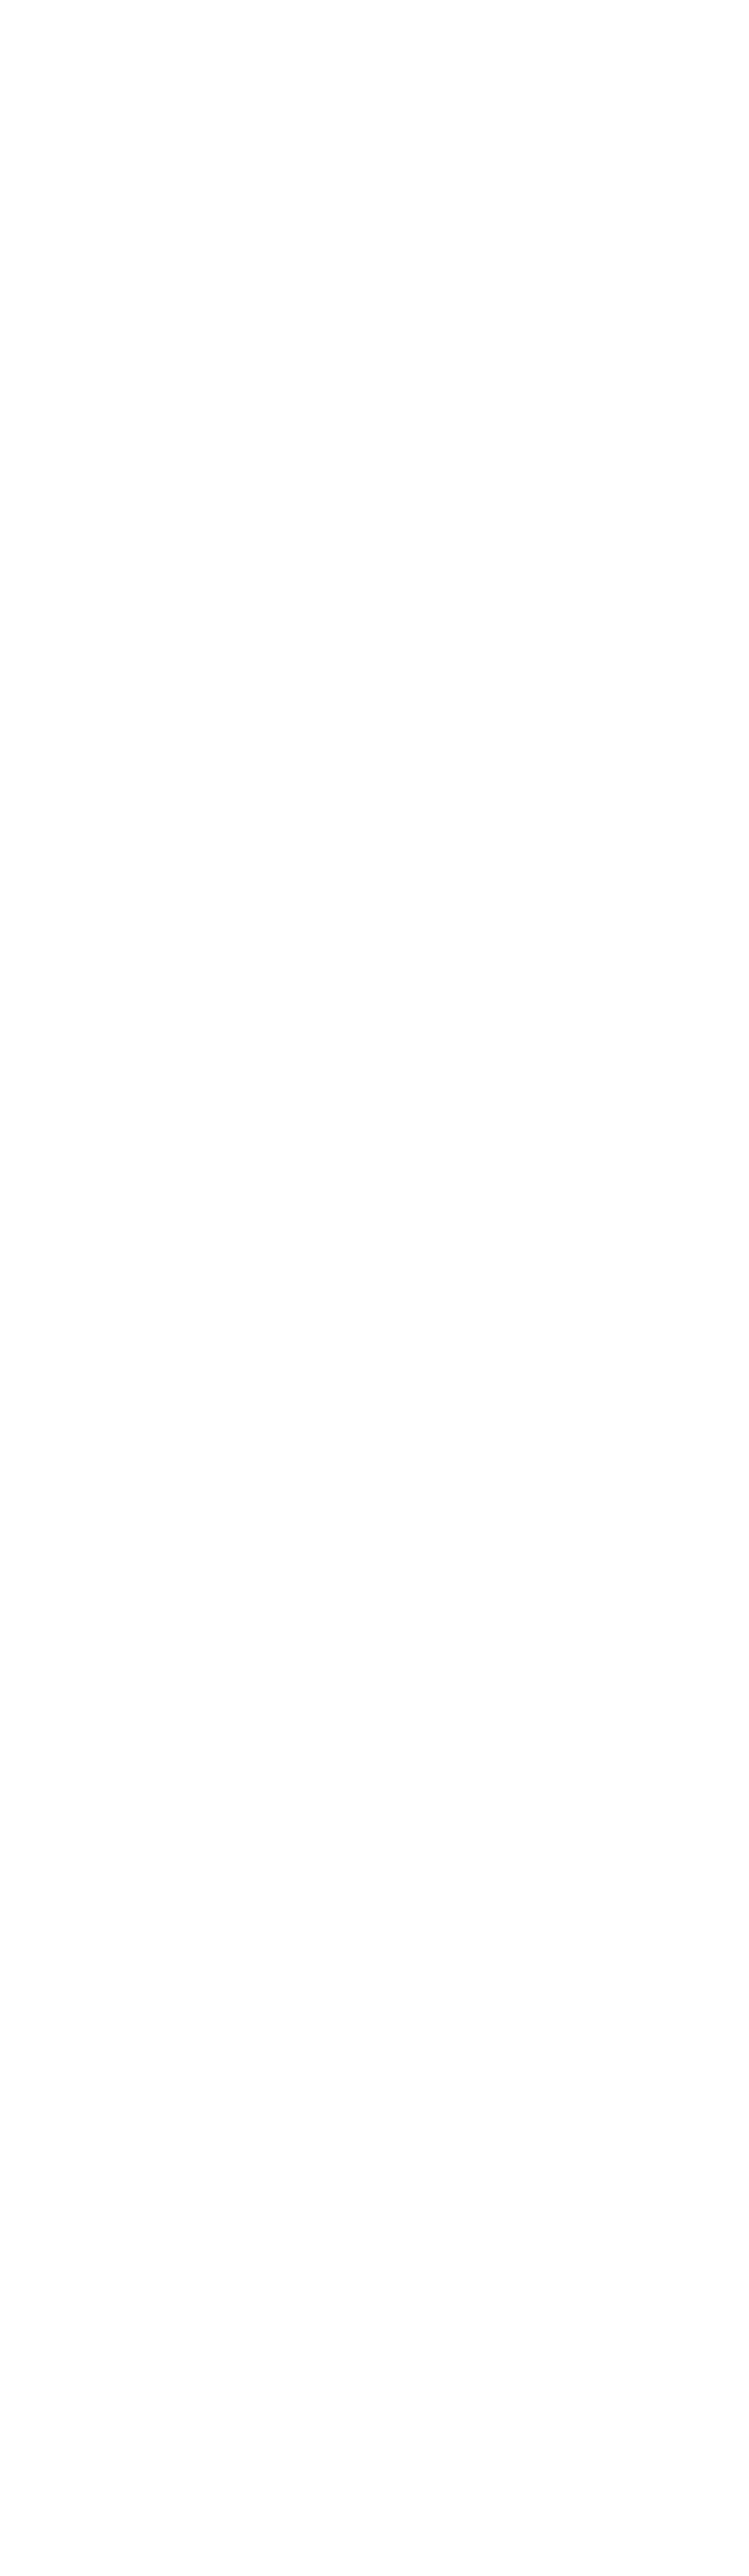 a squiggly, twisted line, representing the tangle that technical docs can get themselves in to, ironically by the author using words such as simple and easy